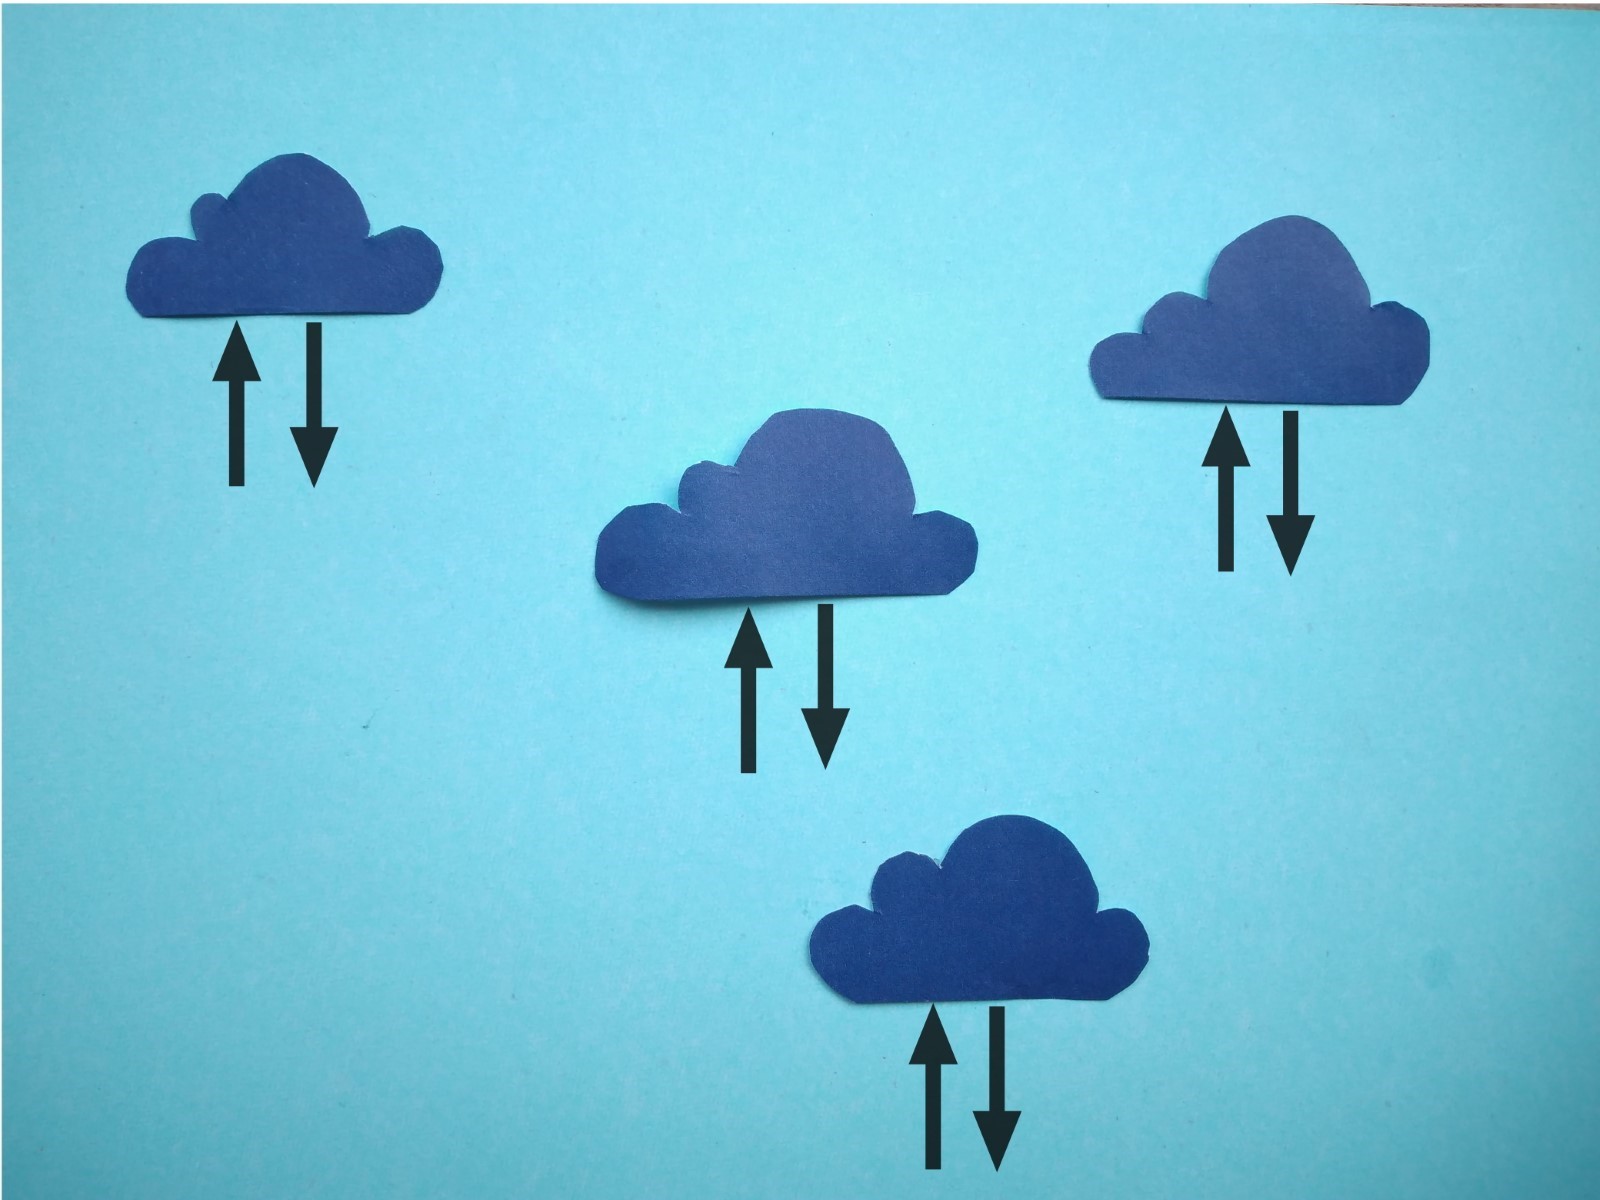 four paper cut-outs of clouds with up/down arrow symbols underneath them